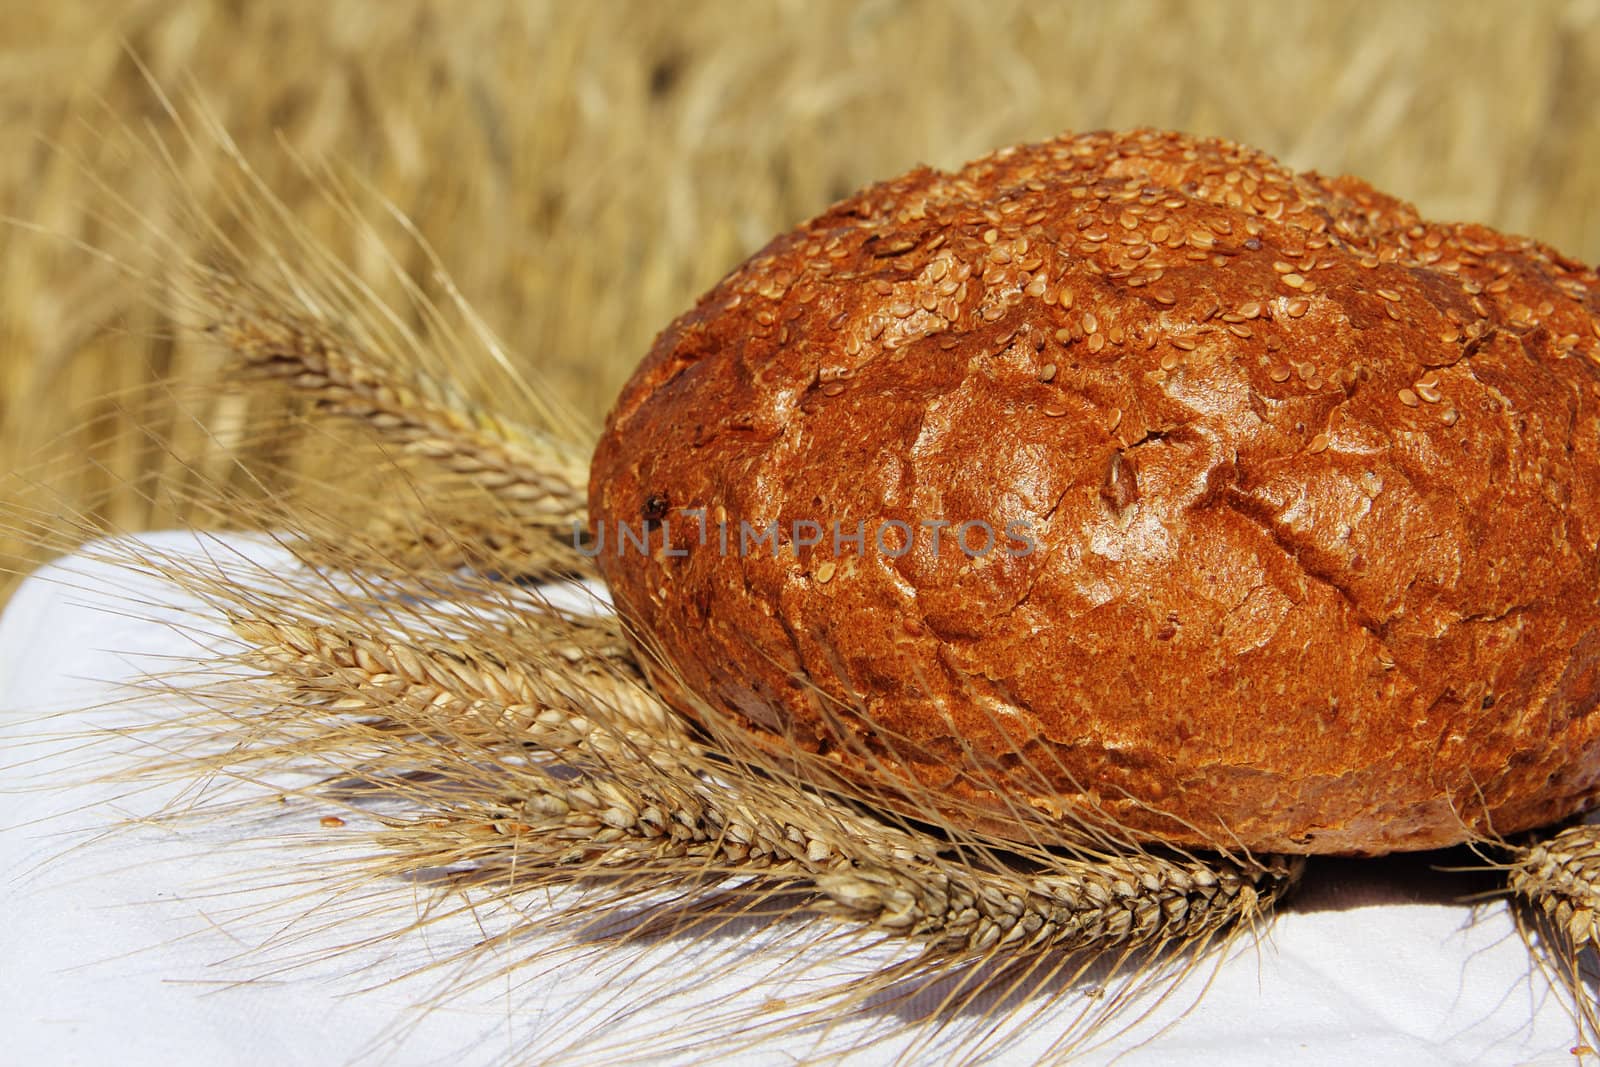 Bread and wheat outdoors natural healthy food concept